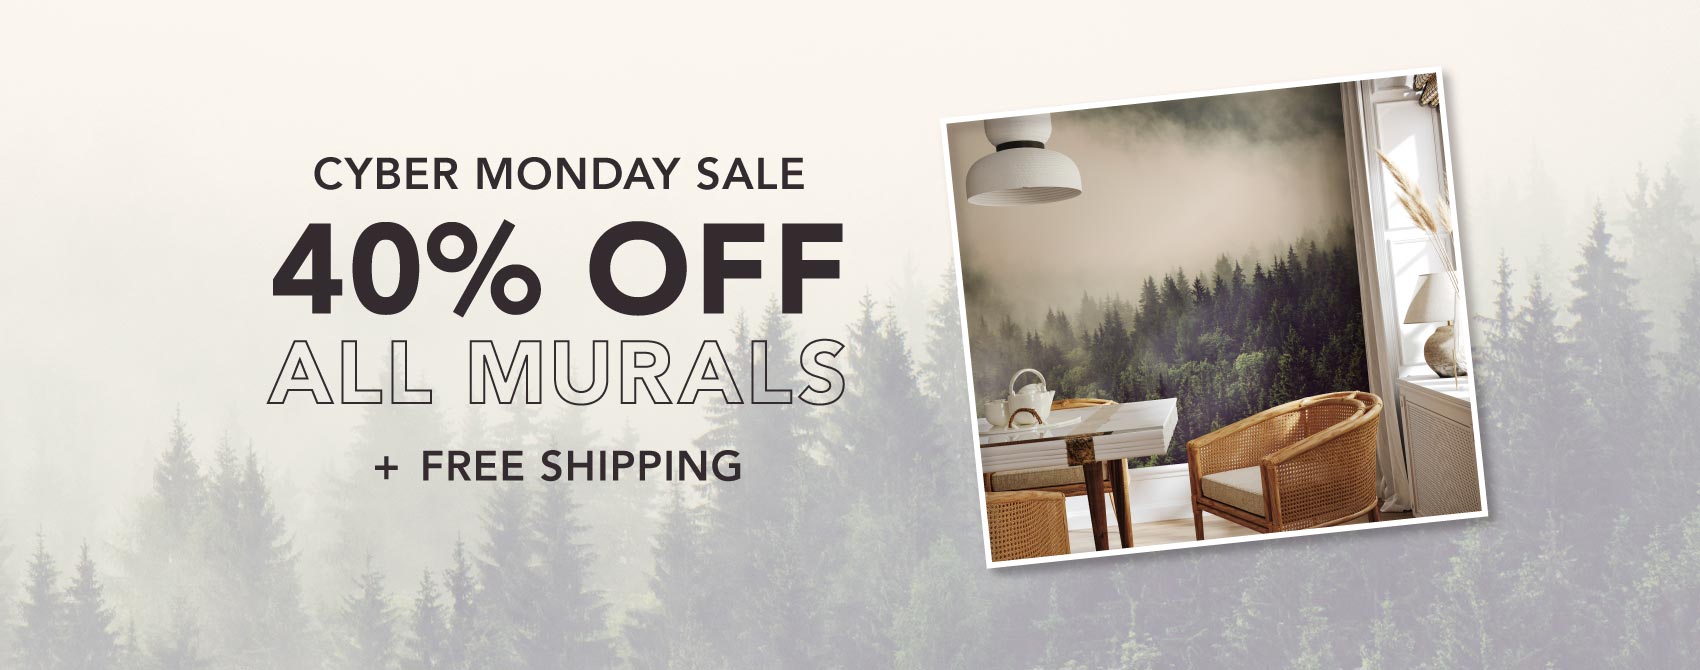 Cyber Monday Sale 40% Off all murals plus free shipping